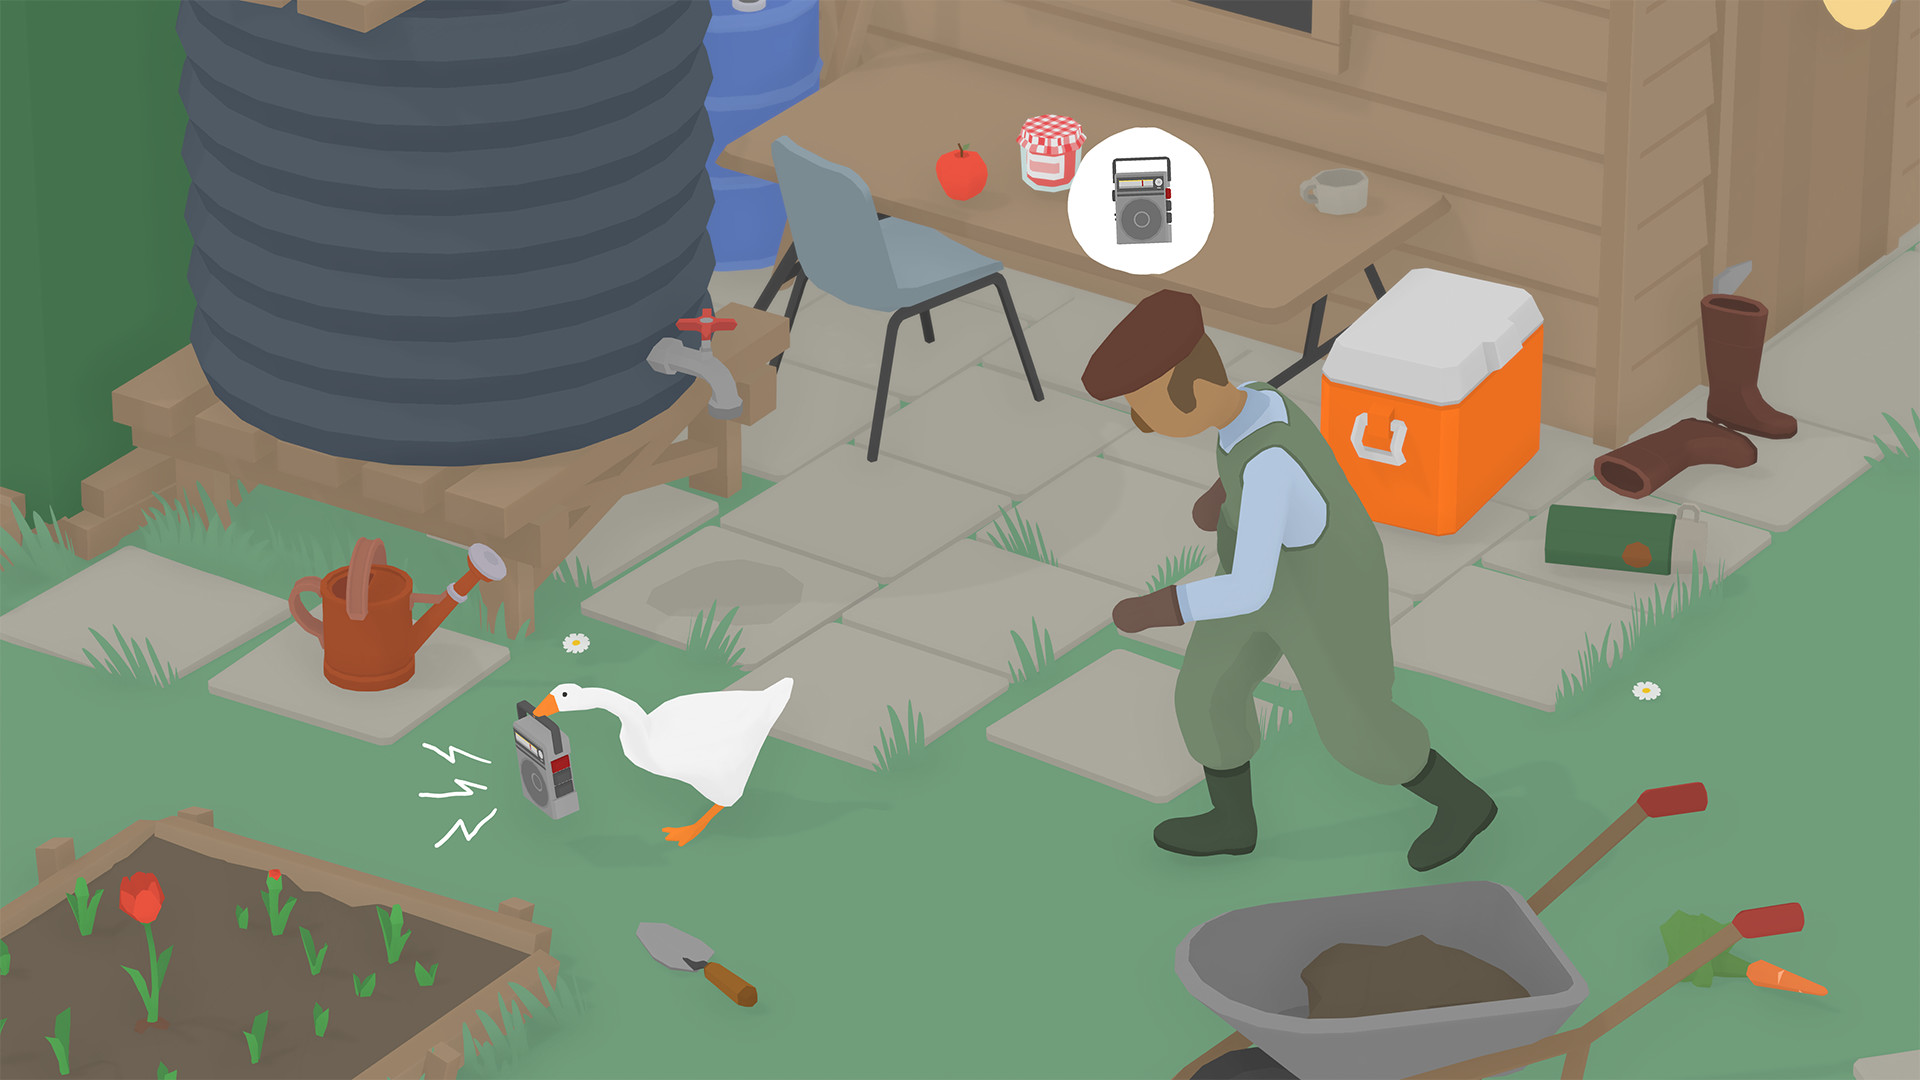 Untitled Goose Game - Unlucky Achievement / Trophy Guide